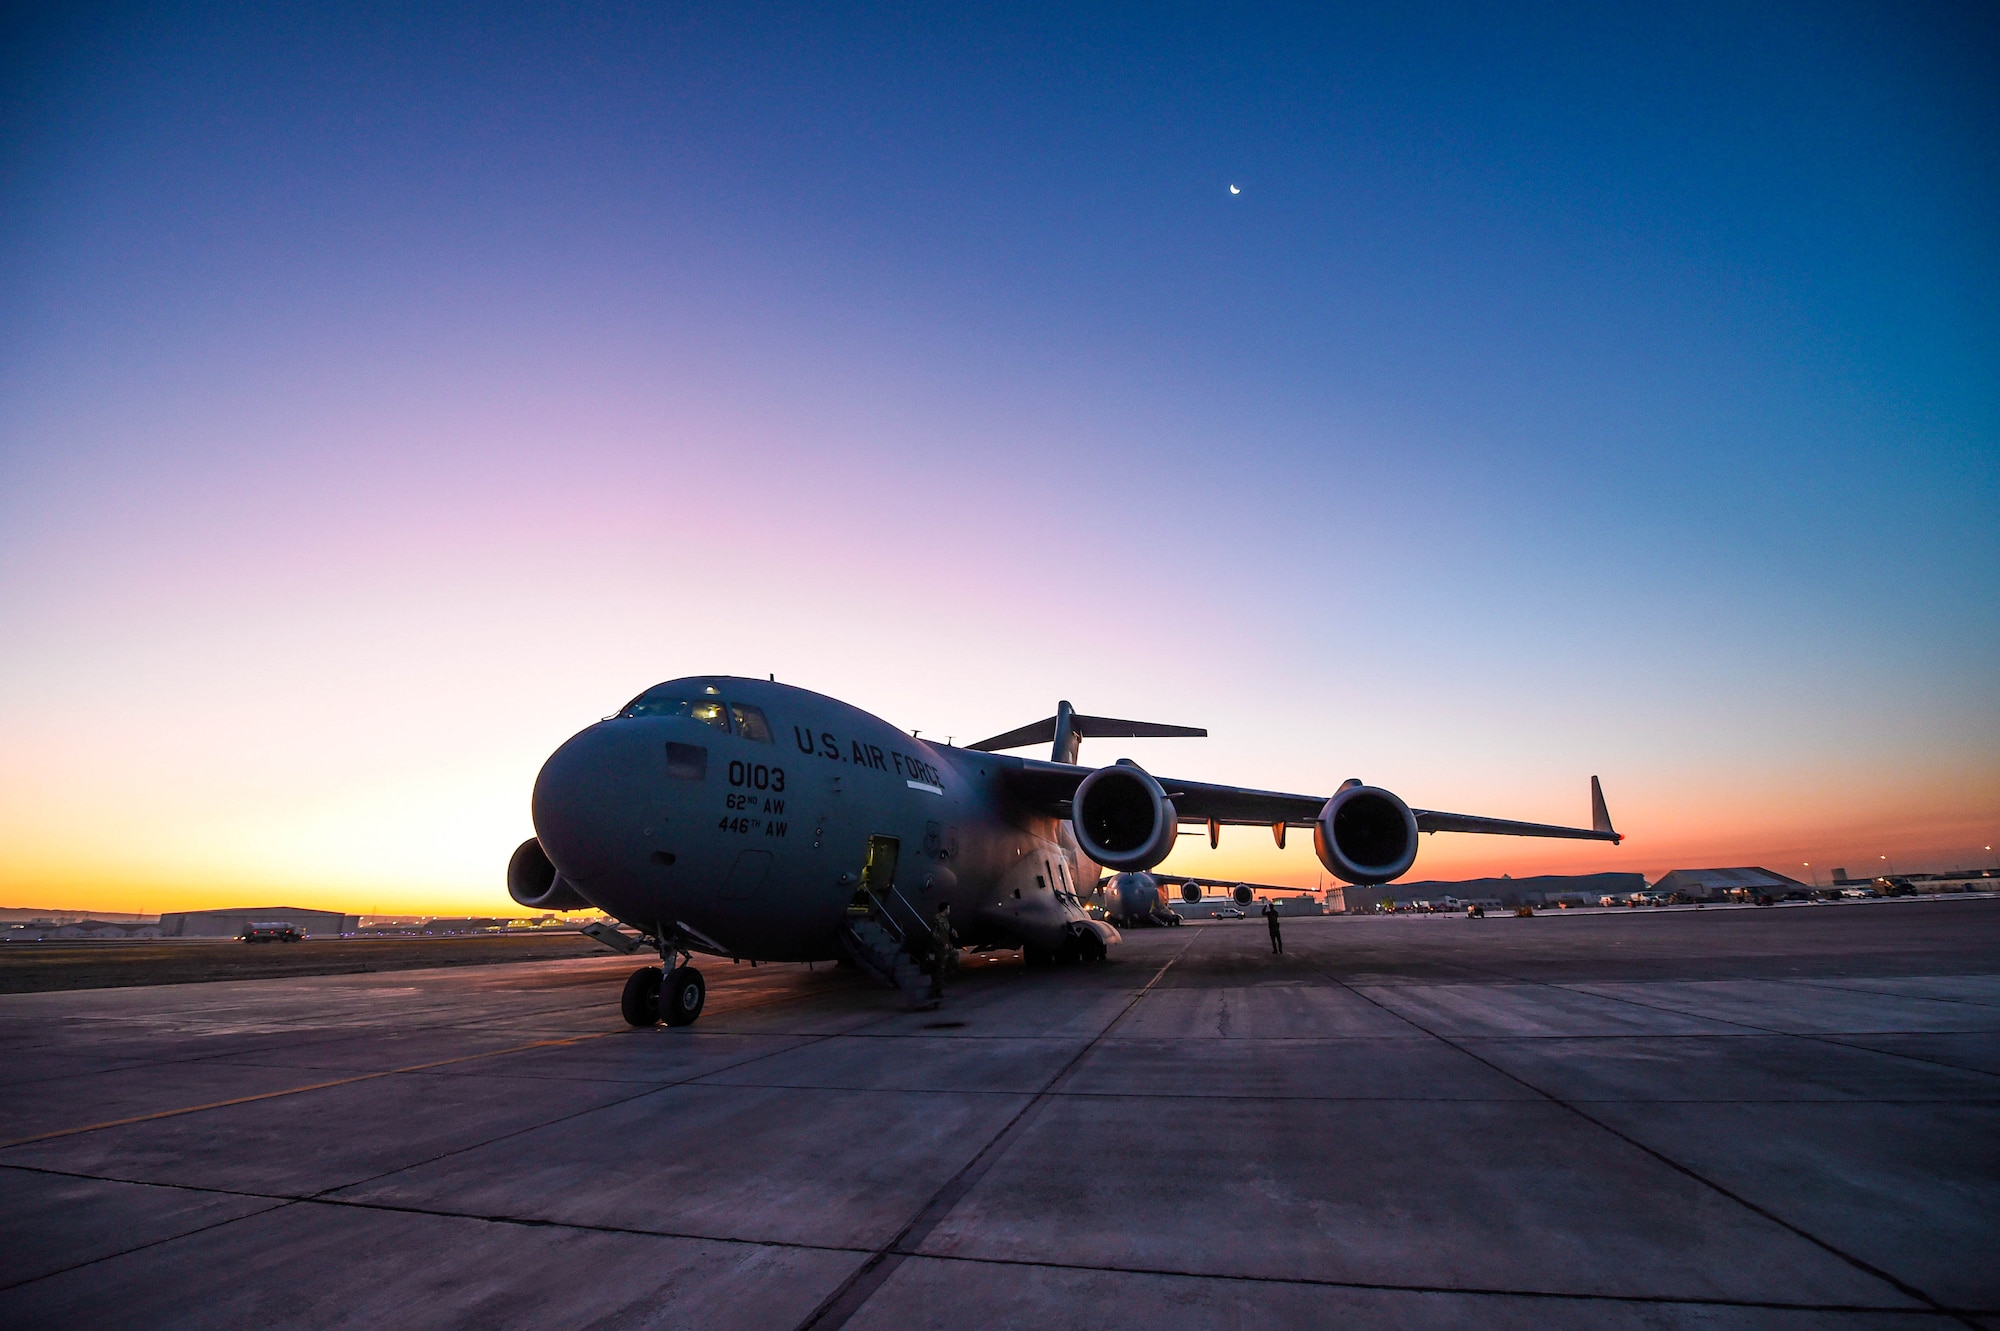 A C-17 Globemaster III sits on a flight line in Iraq, Dec. 20, 2019. The C-17 Globemaster III provides worldwide combat and humanitarian airlift every day. (U.S. Air Force photo by Airman 1st Class Mikayla Heineck)